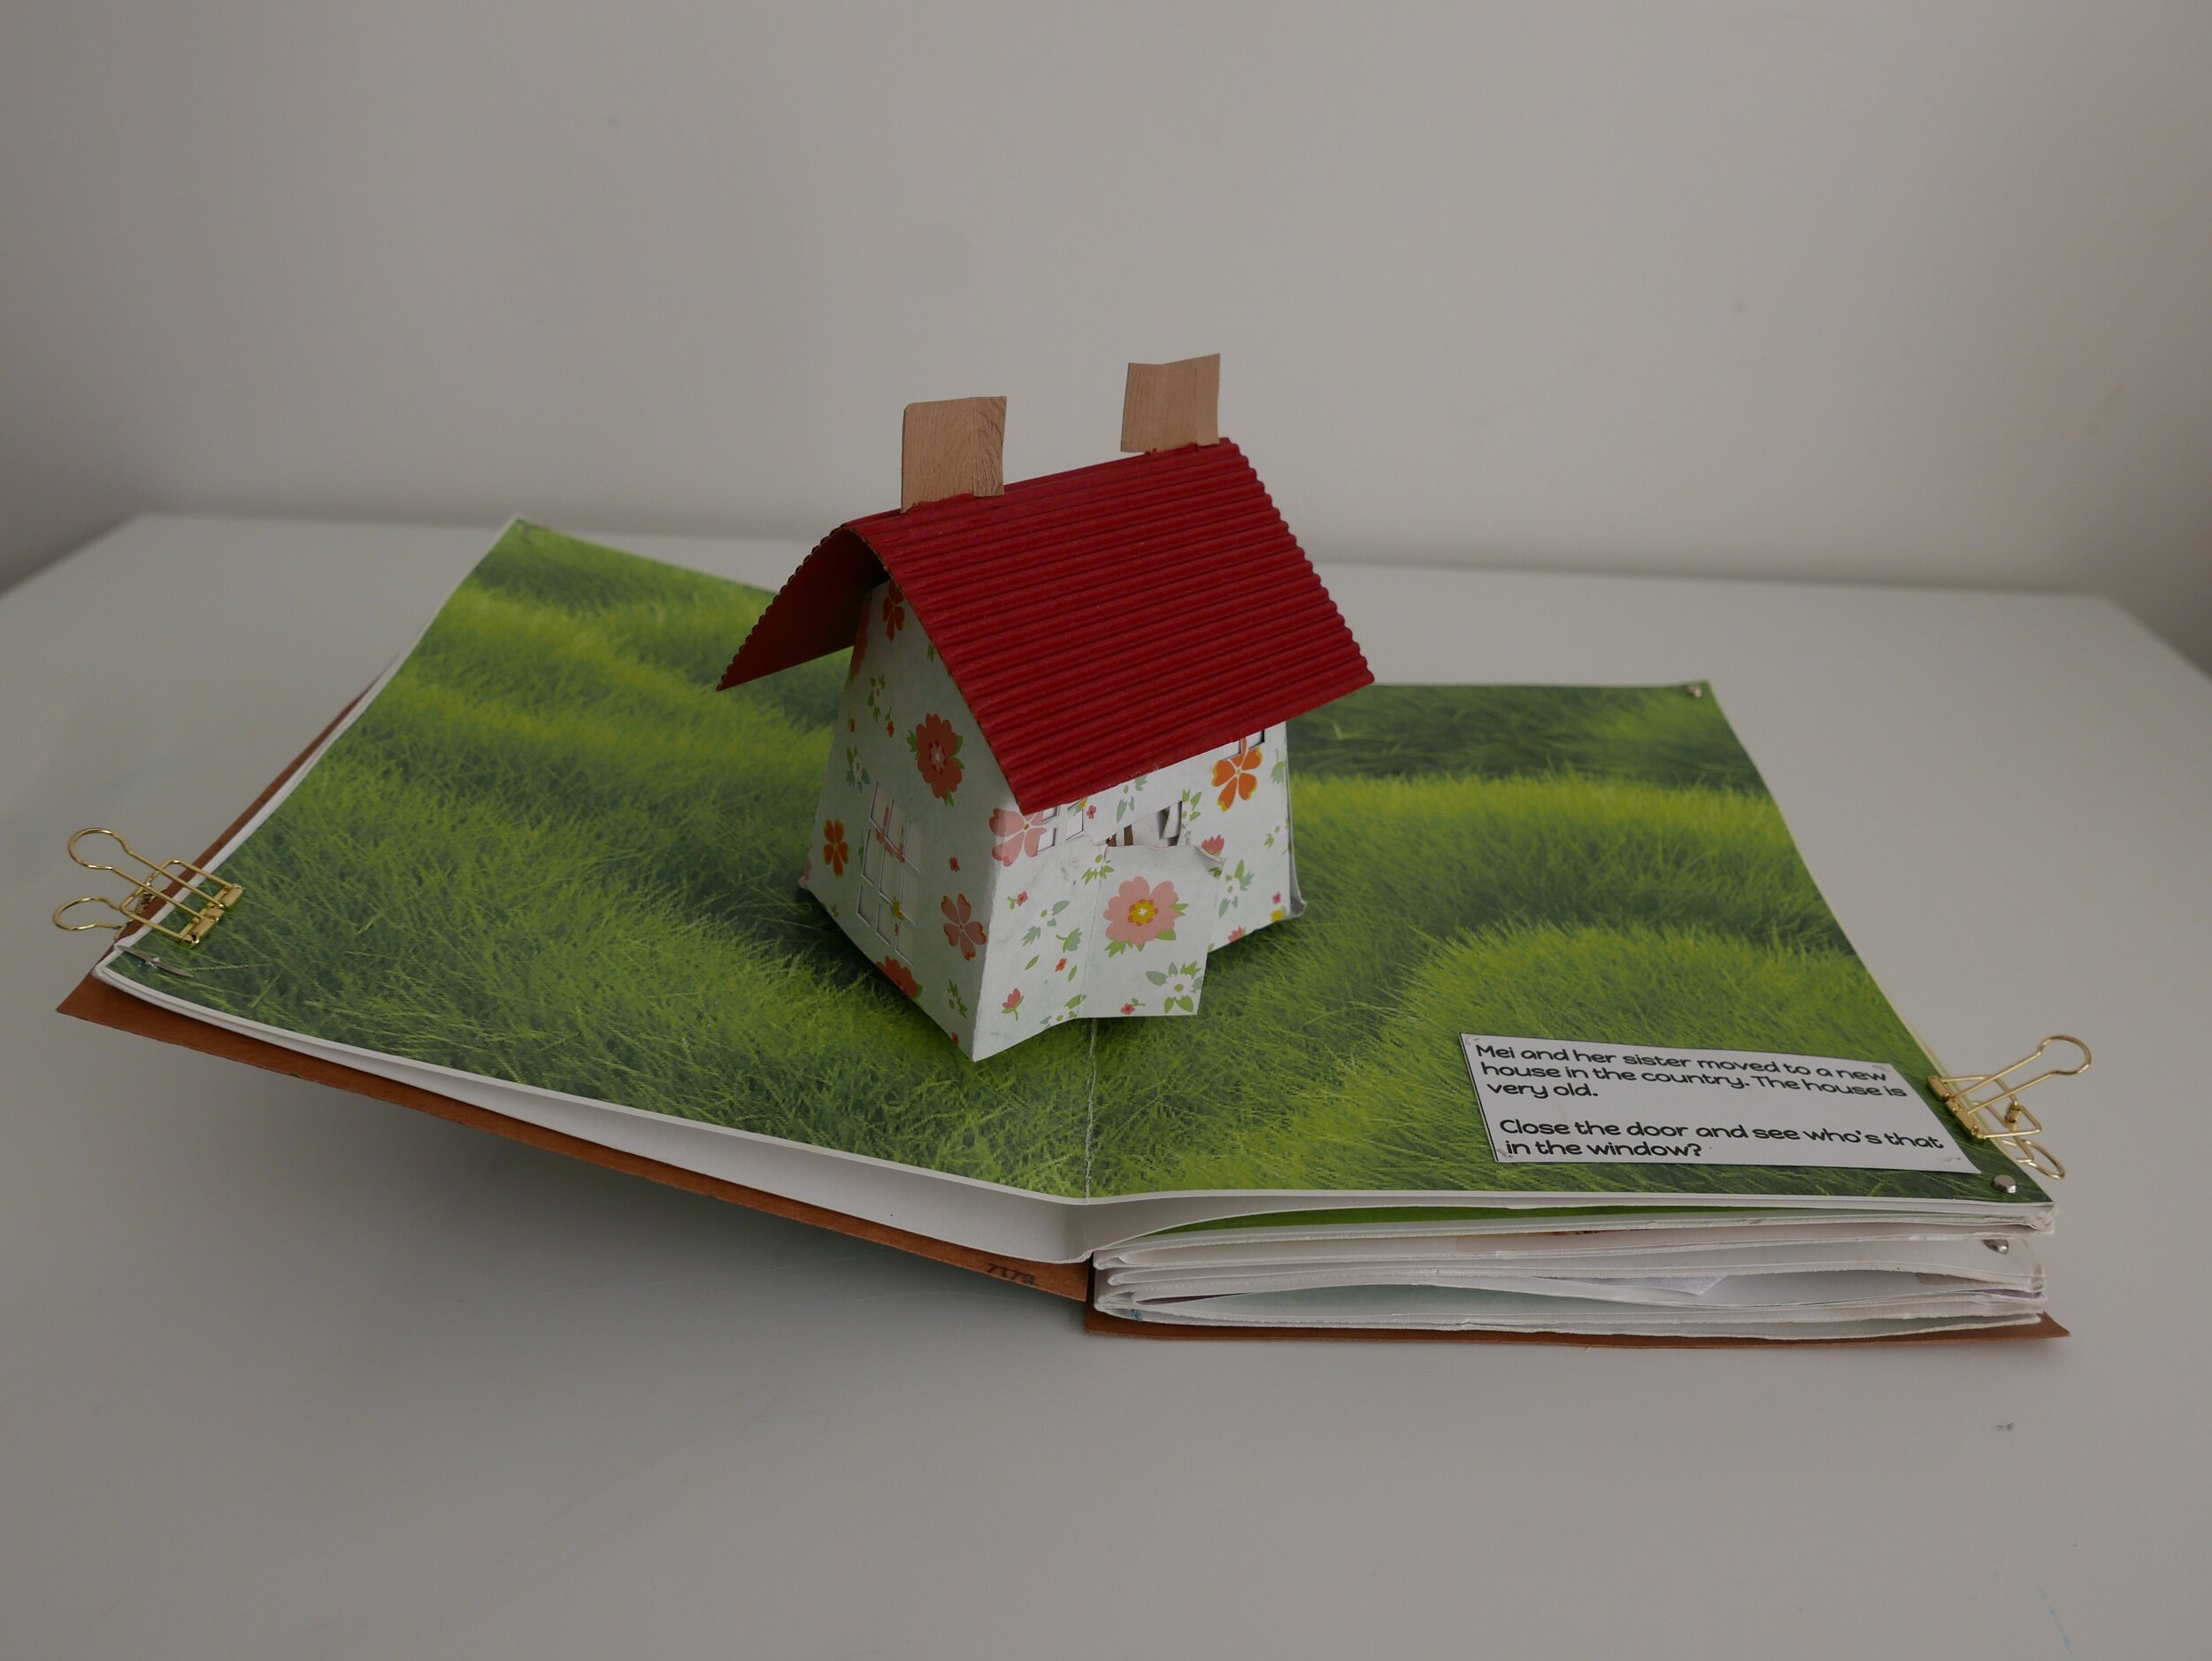 Pop up book shop. The cube.  Store window displays, Pop up book